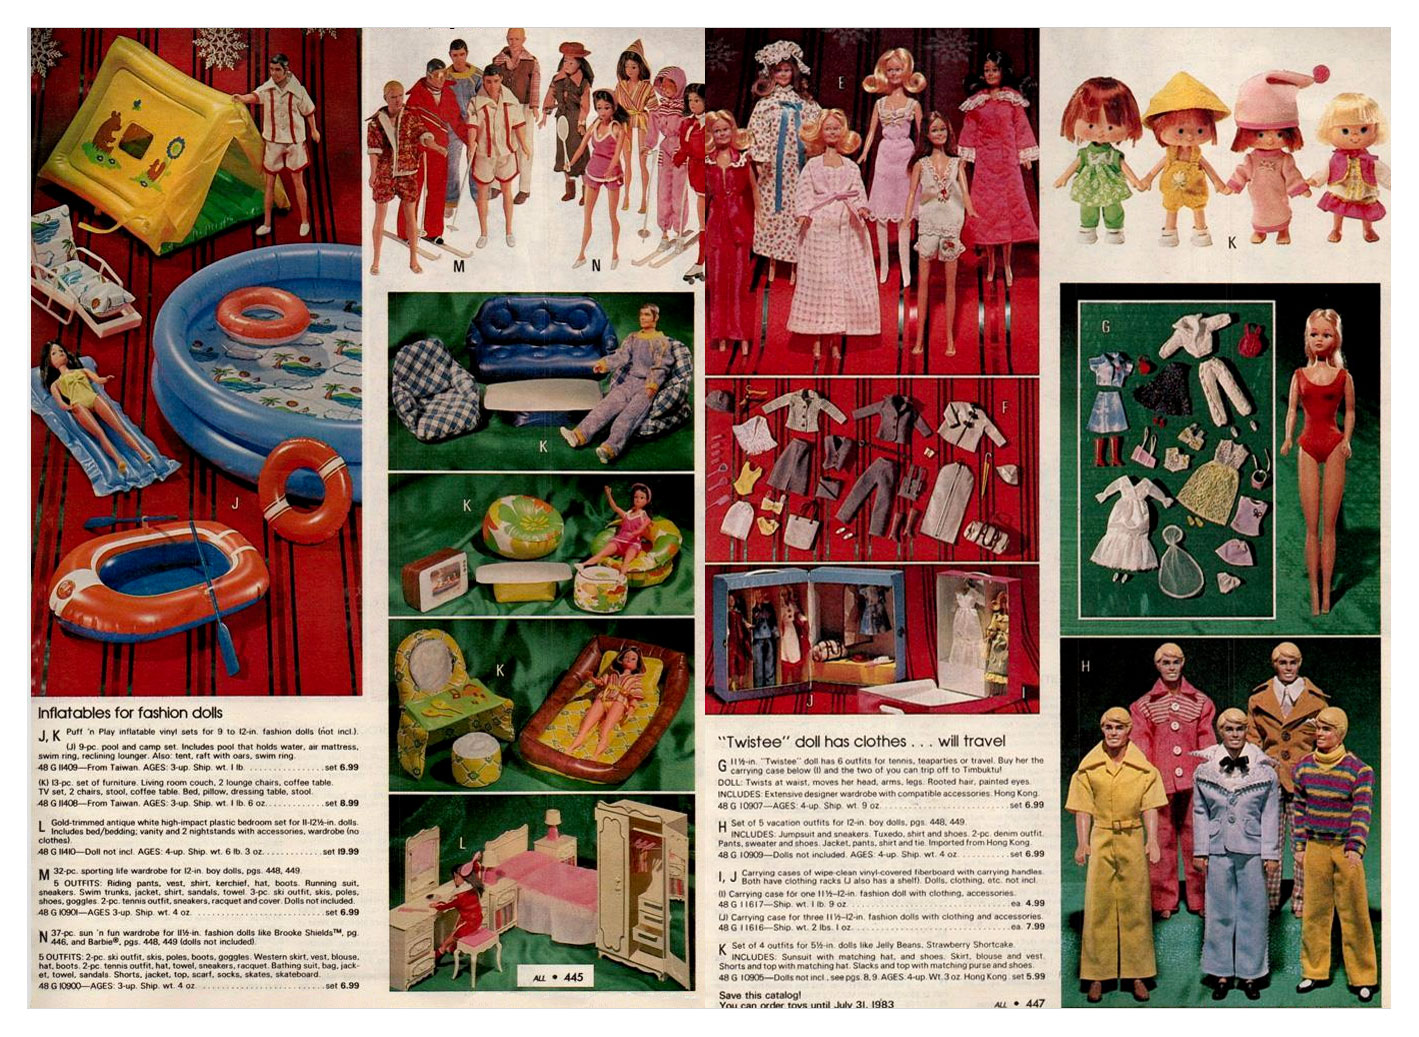 From 1982 Montgomery Ward Christmas catalogue